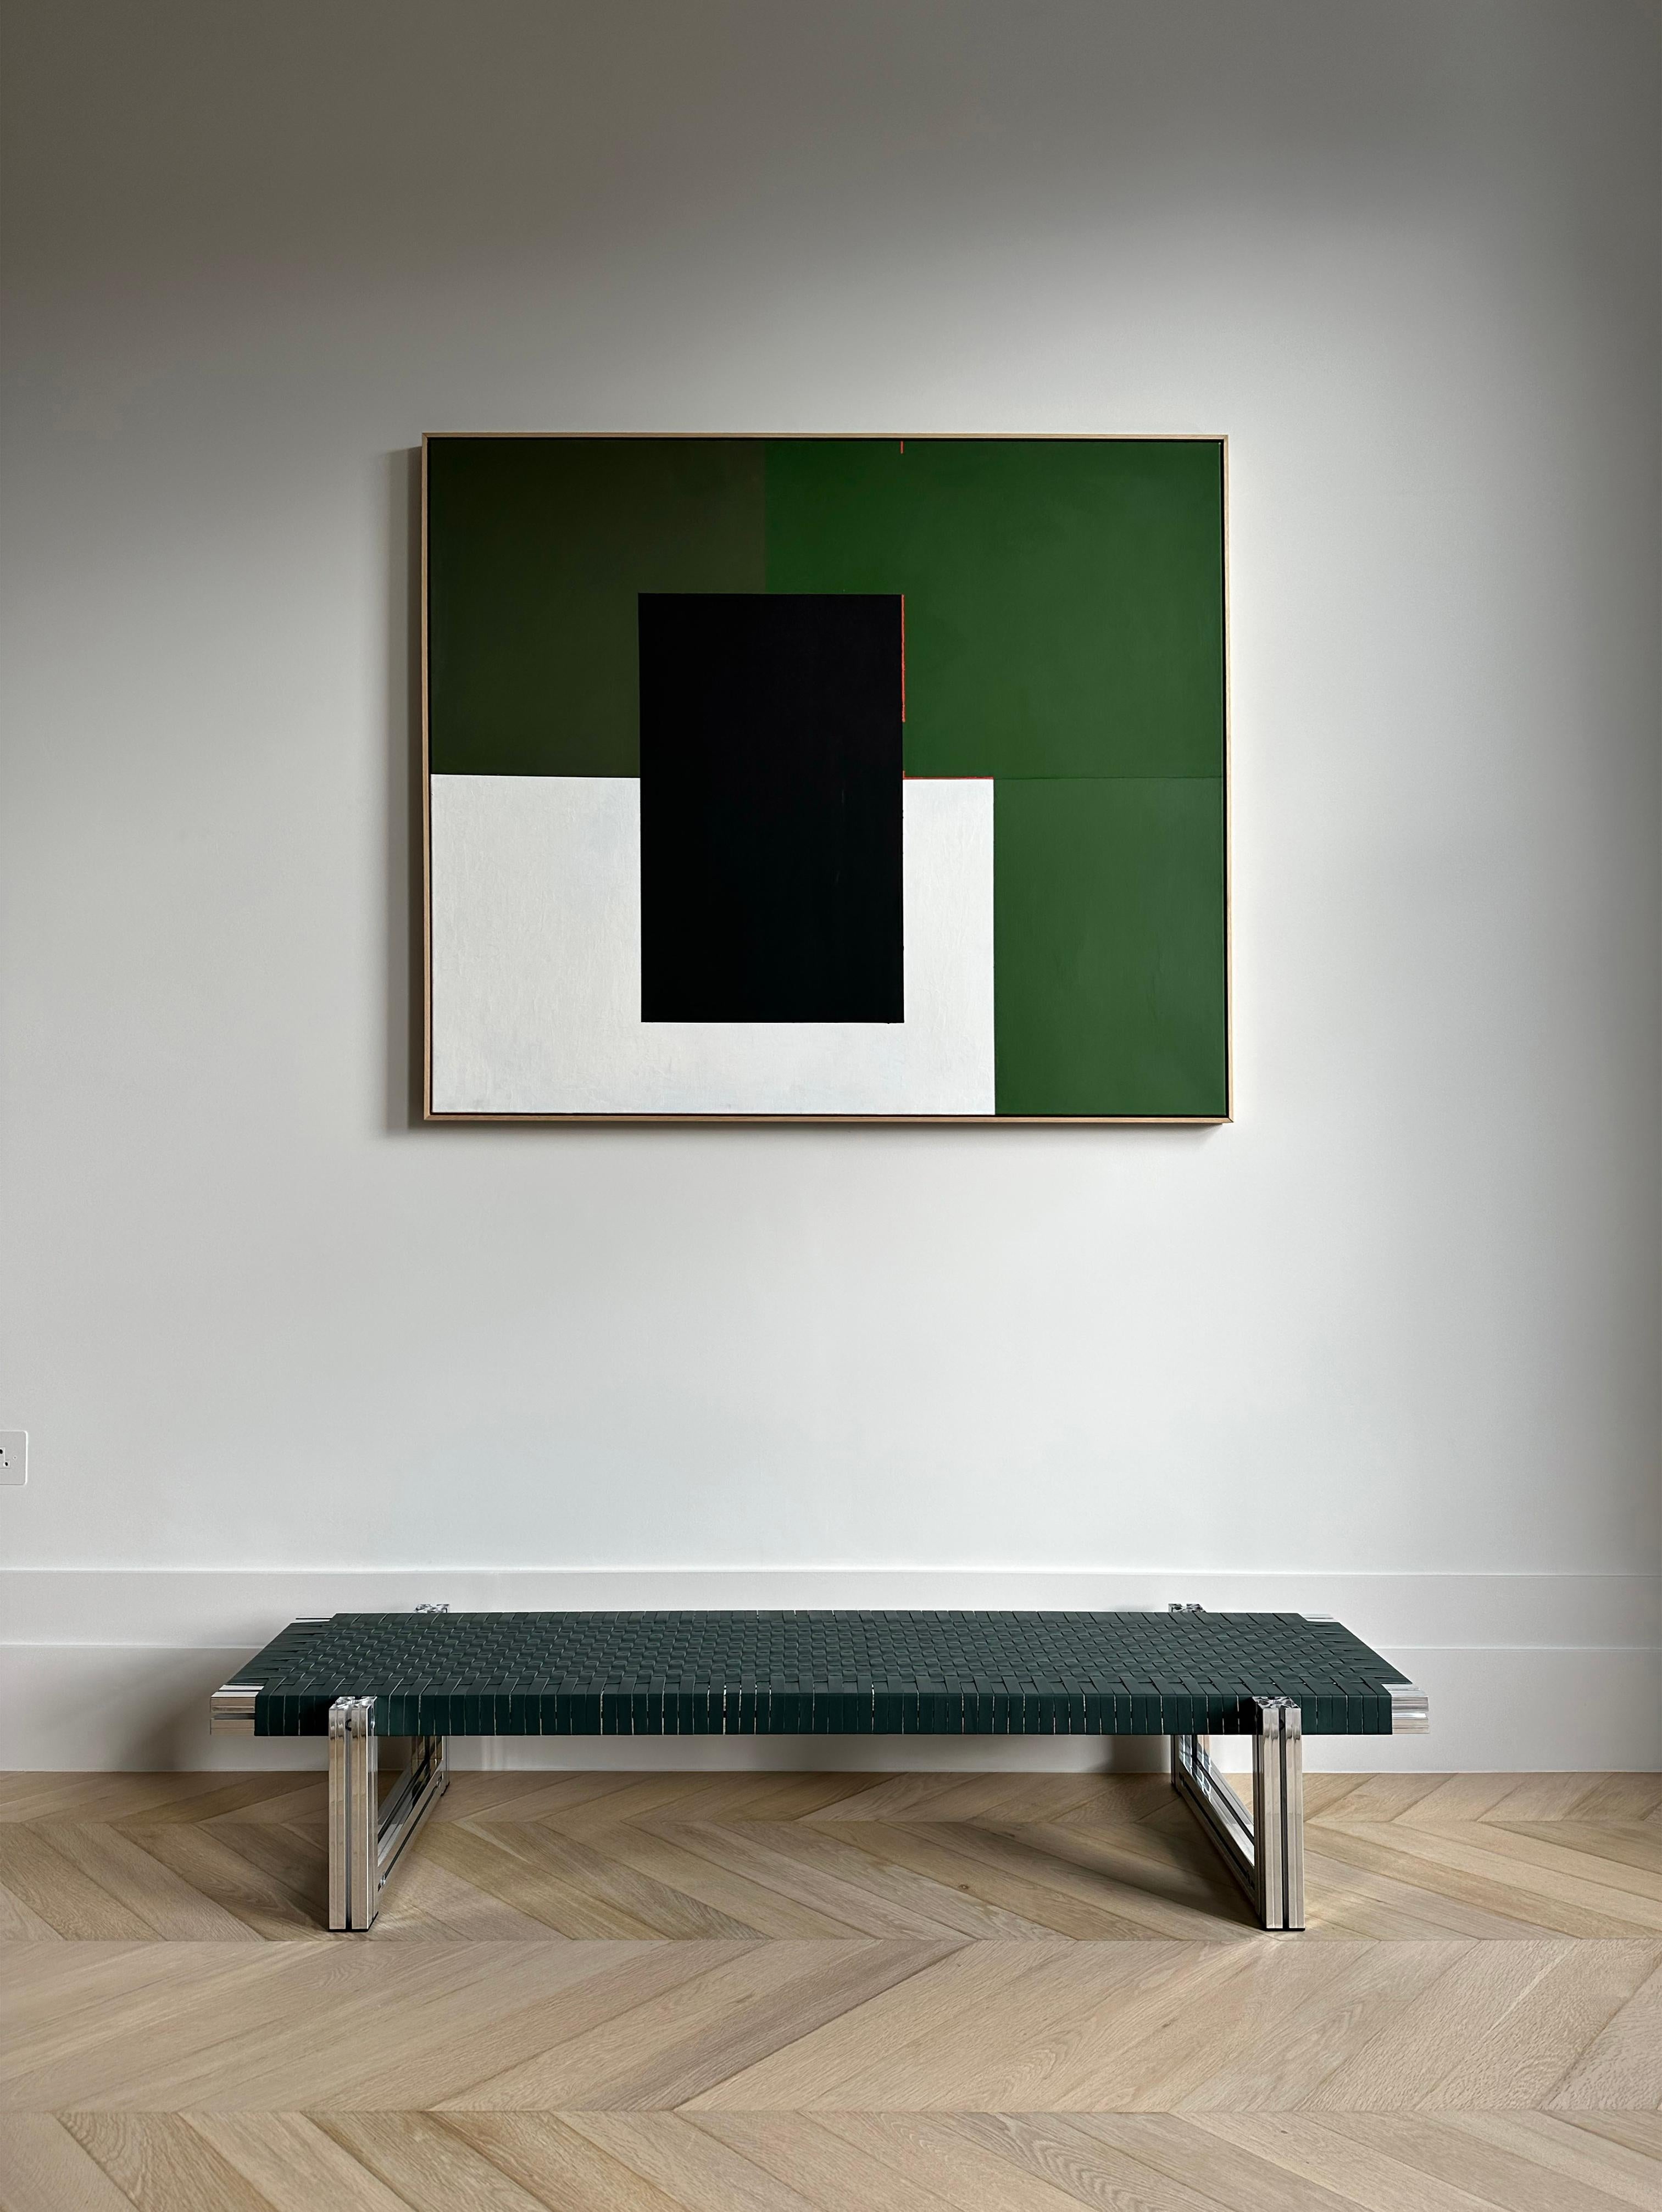 This listing is a special edition with a mirror polished aluminium extrusion structure, where the legs have been moved to the outside, and a seating woven from 20mm wide green leather straps.

Originally realised for the Hepworth Gallery in